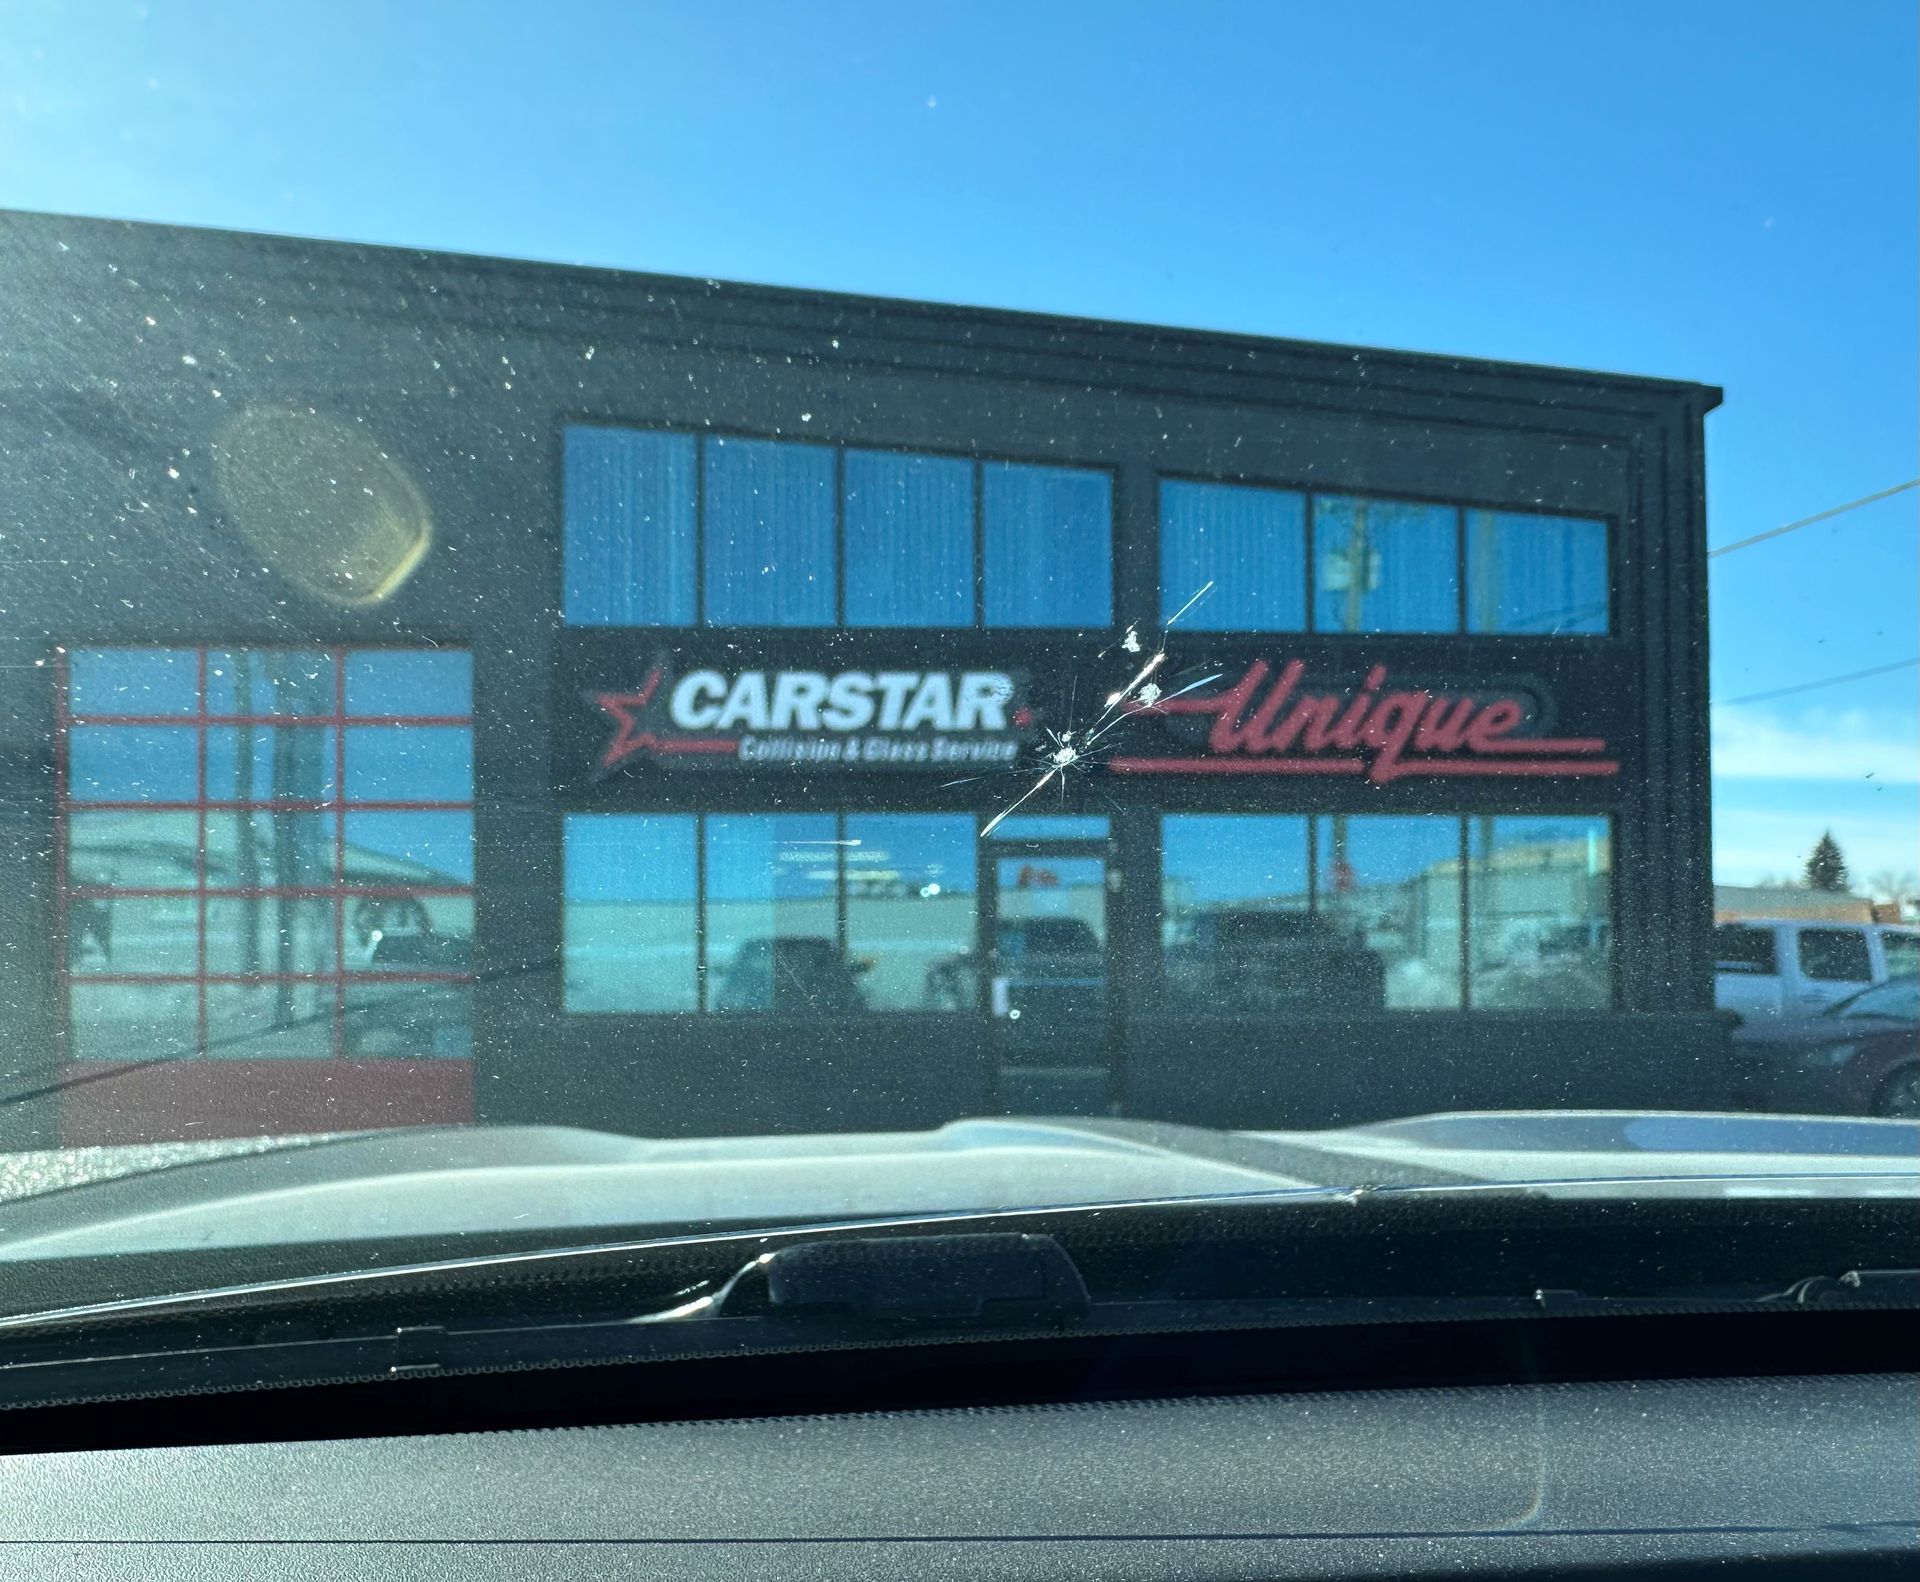 A car is parked in front of a carstar and unique store